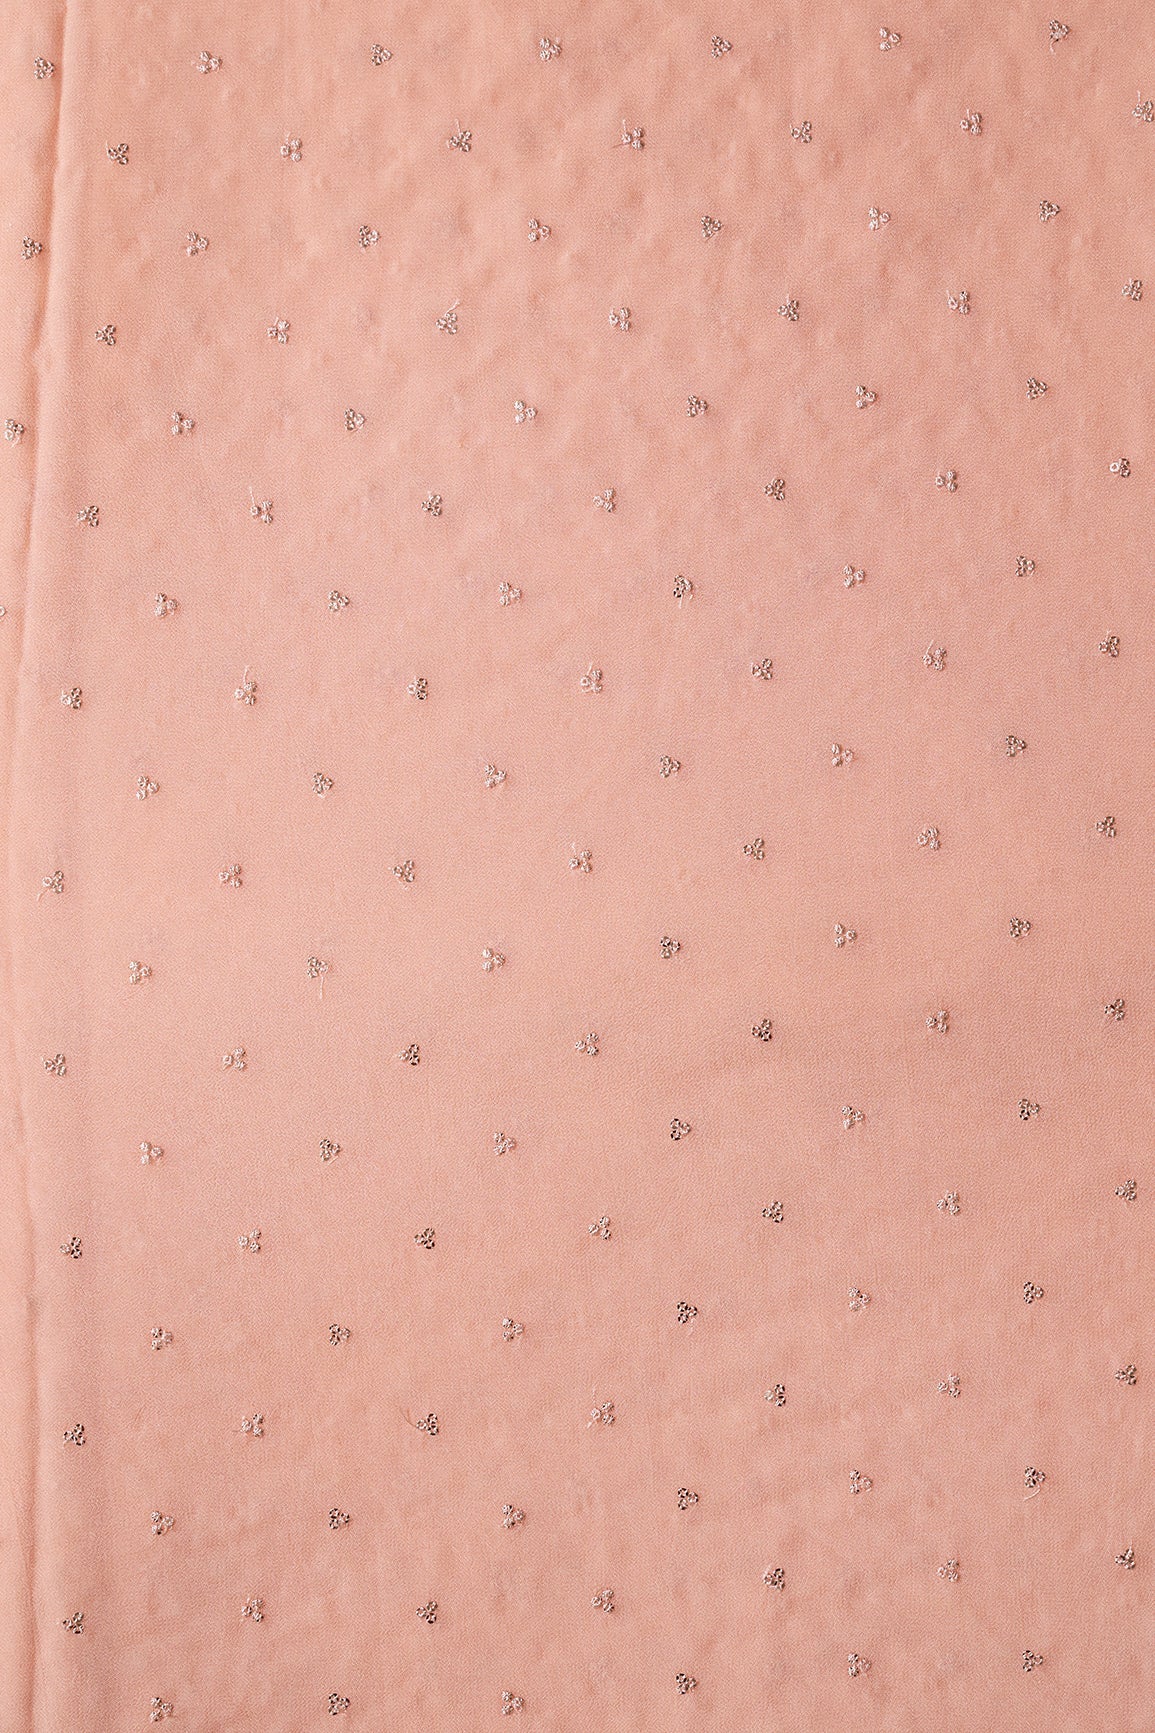 Small Motif Sequins Embroidery On Peach Viscose Georgette Fabric - doeraa